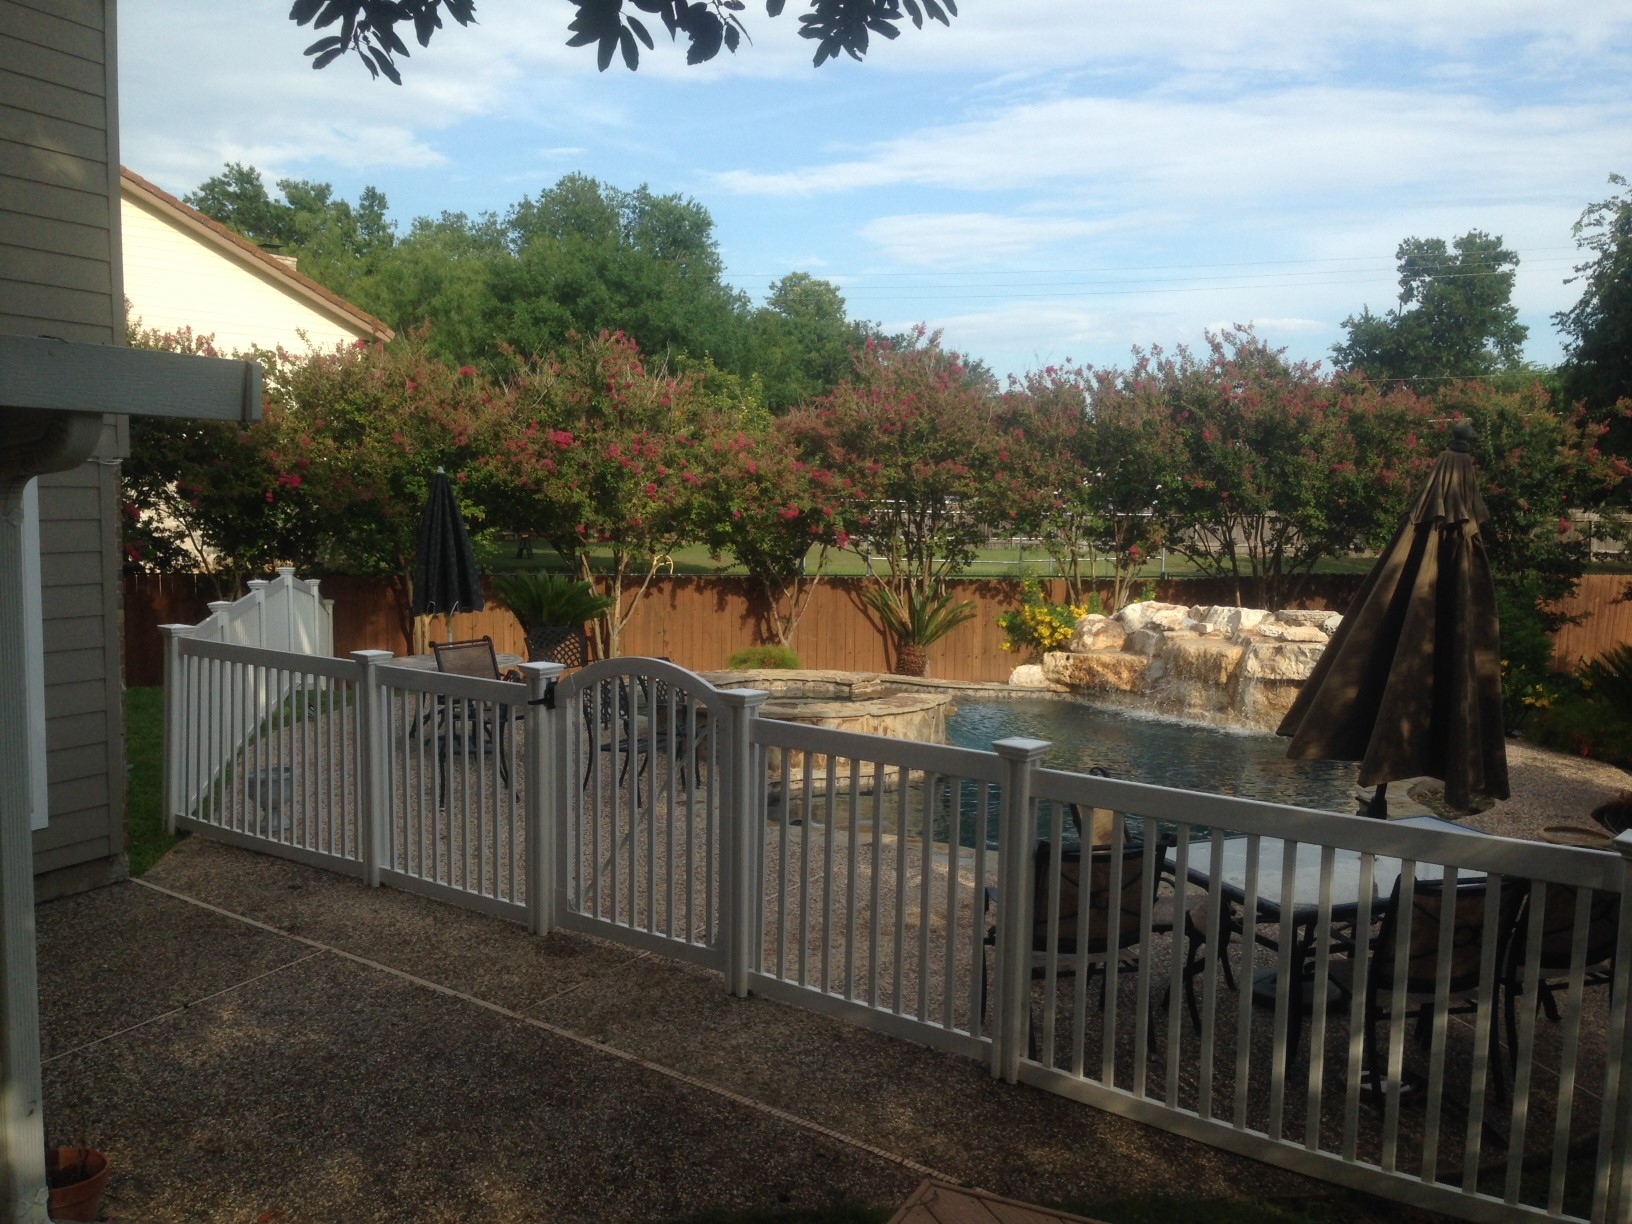 Brian keeps his pool safe and secure with the Plain Jane Vinyl Pool Fence